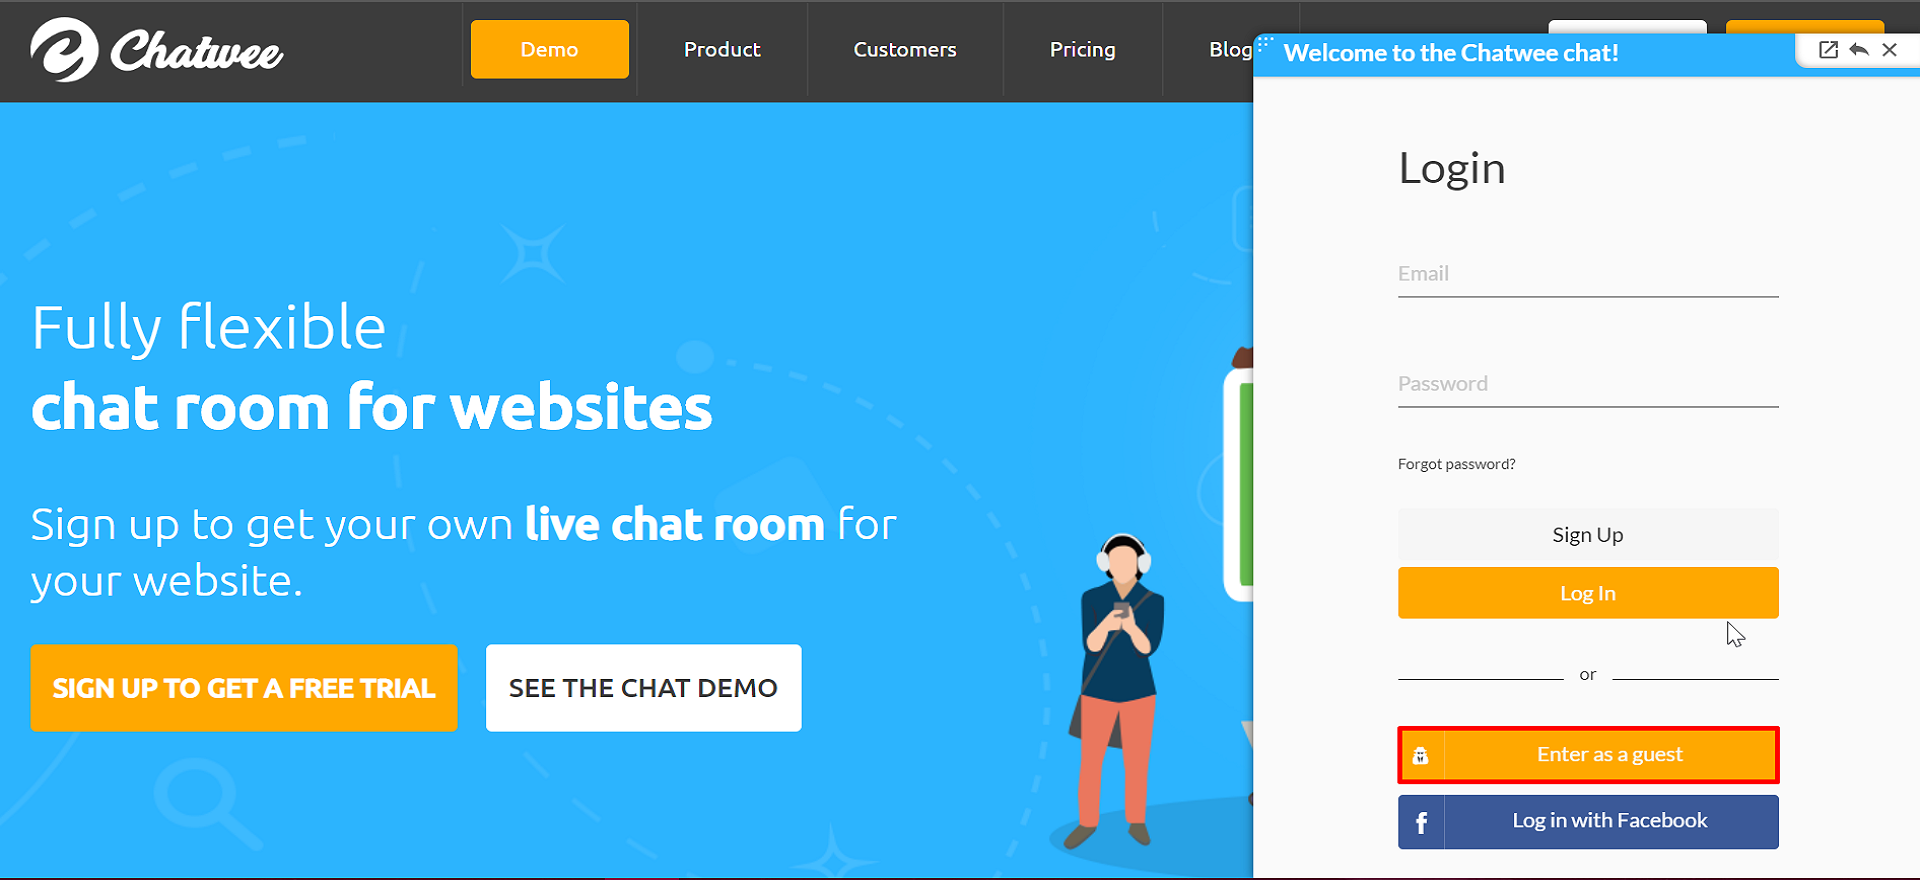 Chatwee live chat login options